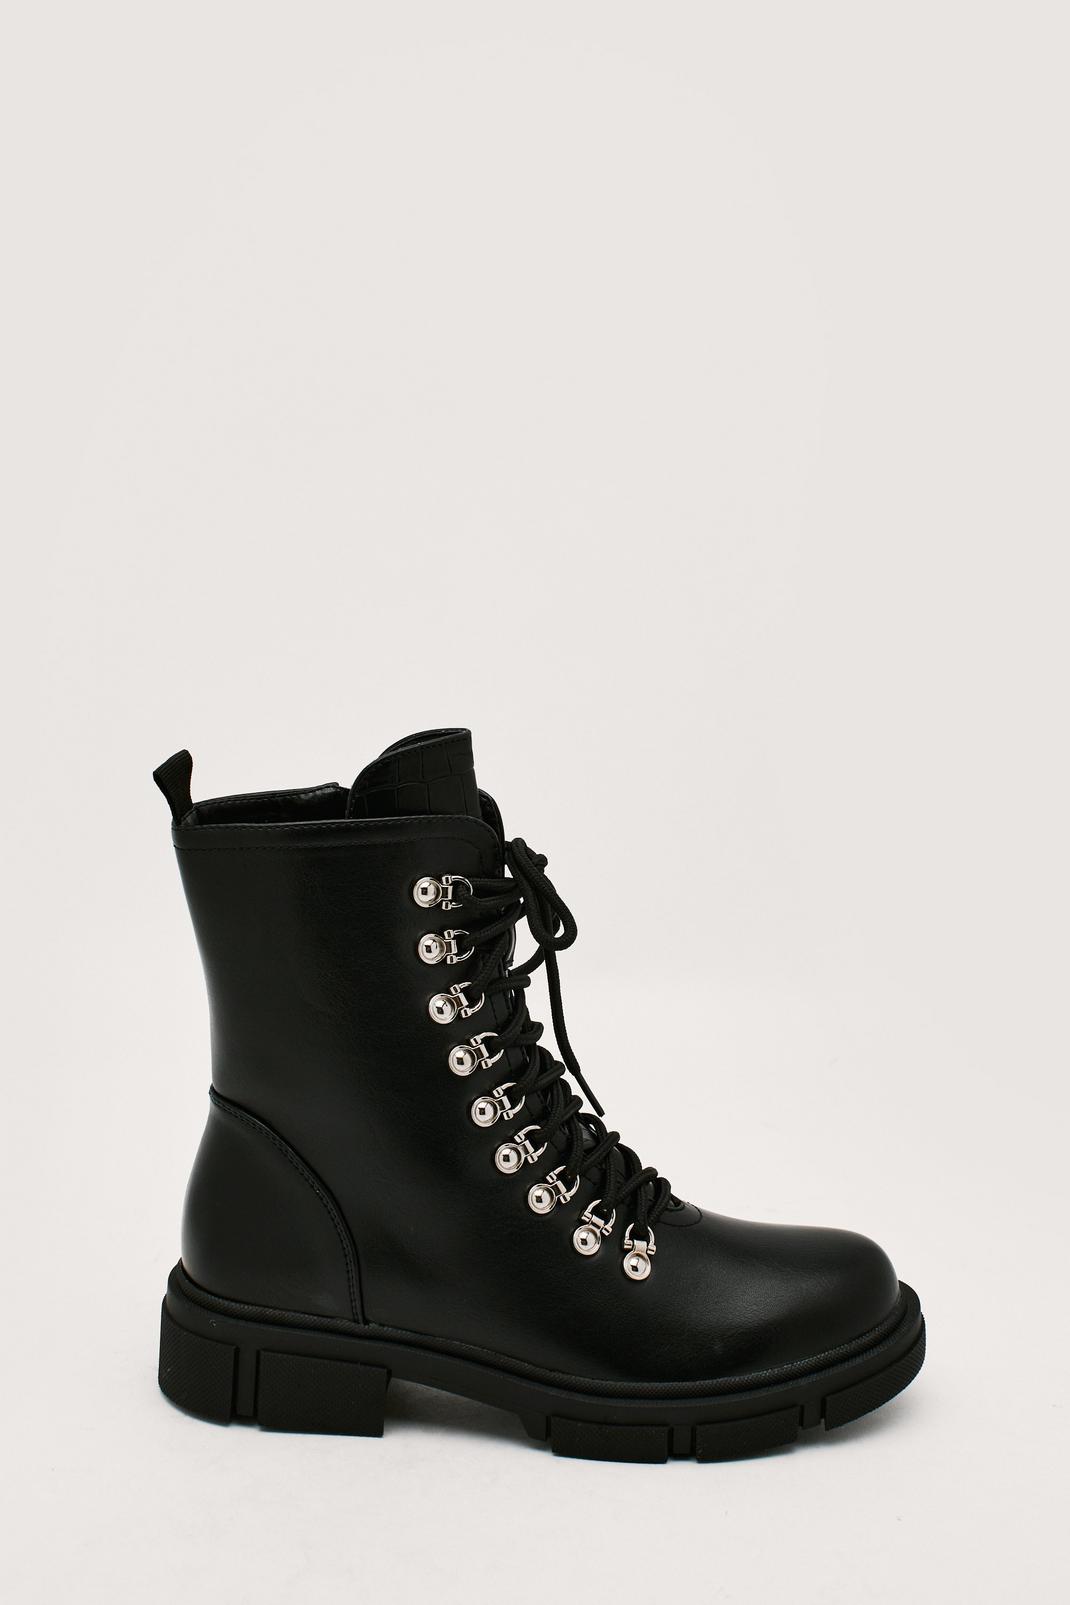 Black D Ring Lace Up Hiker Boots image number 1